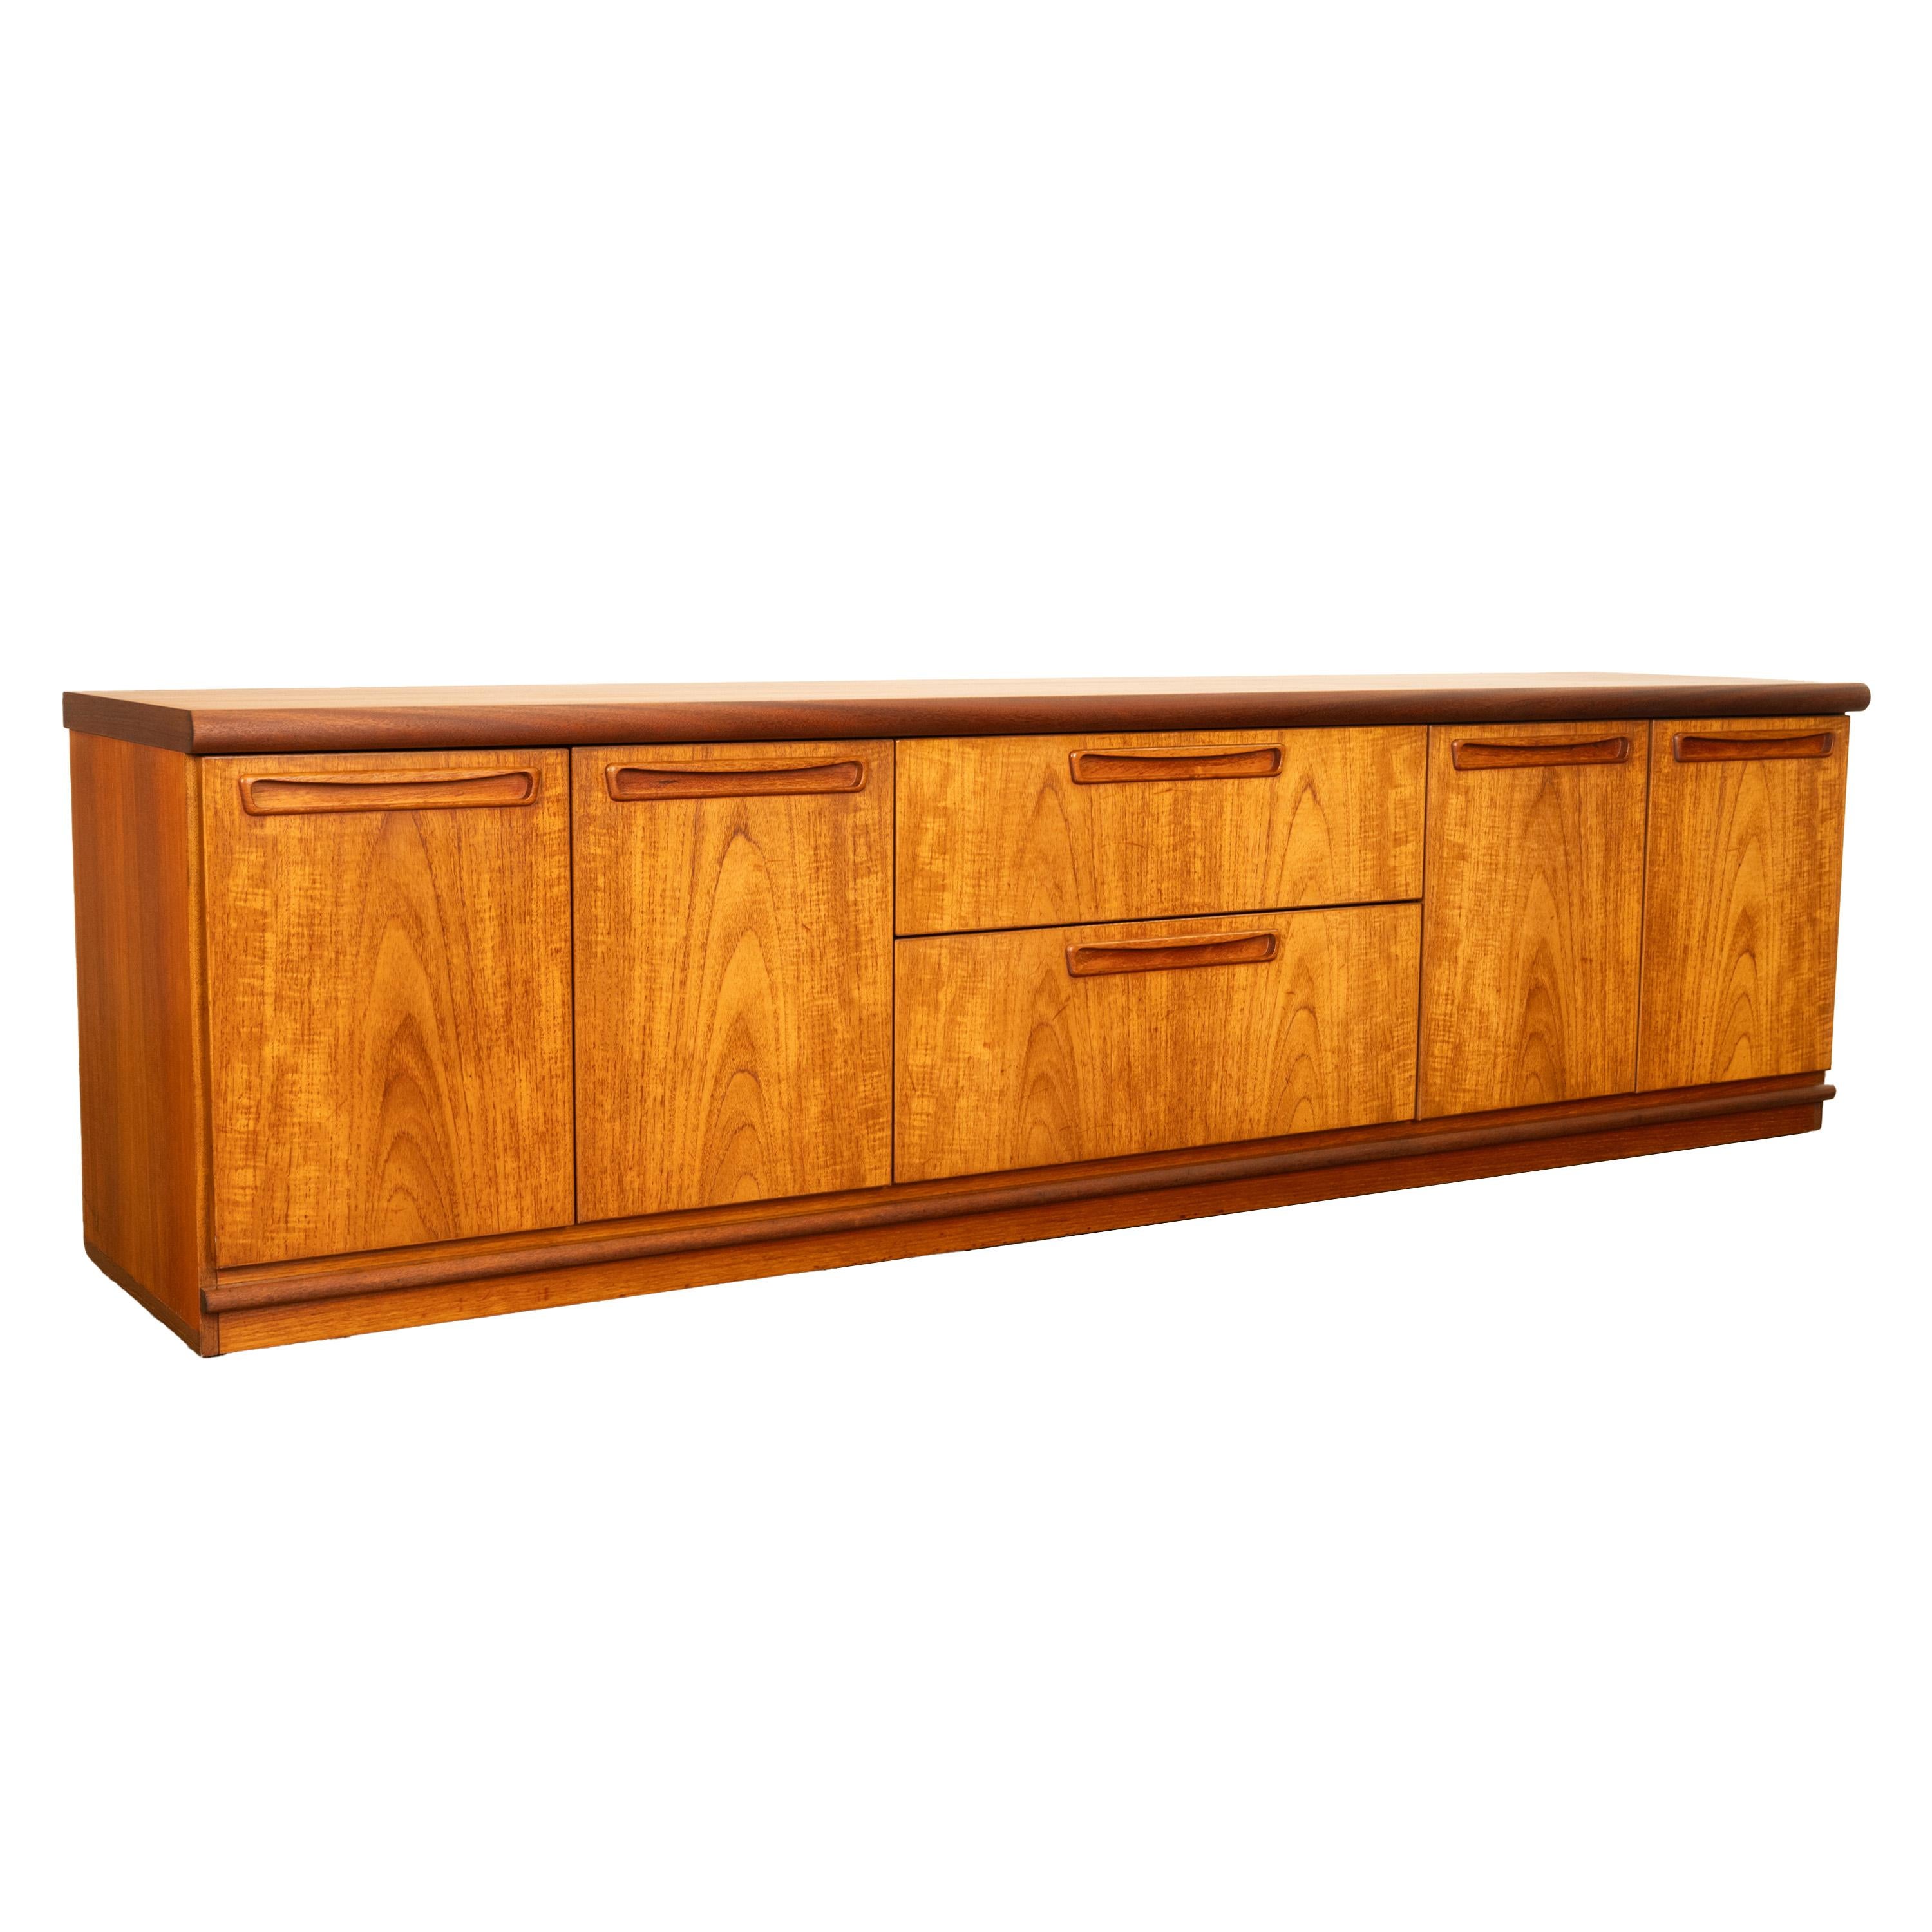 Vintage Mid Century Modern Danish Teak Credenza Sideboard Console Avalon 1960s In Good Condition For Sale In Portland, OR